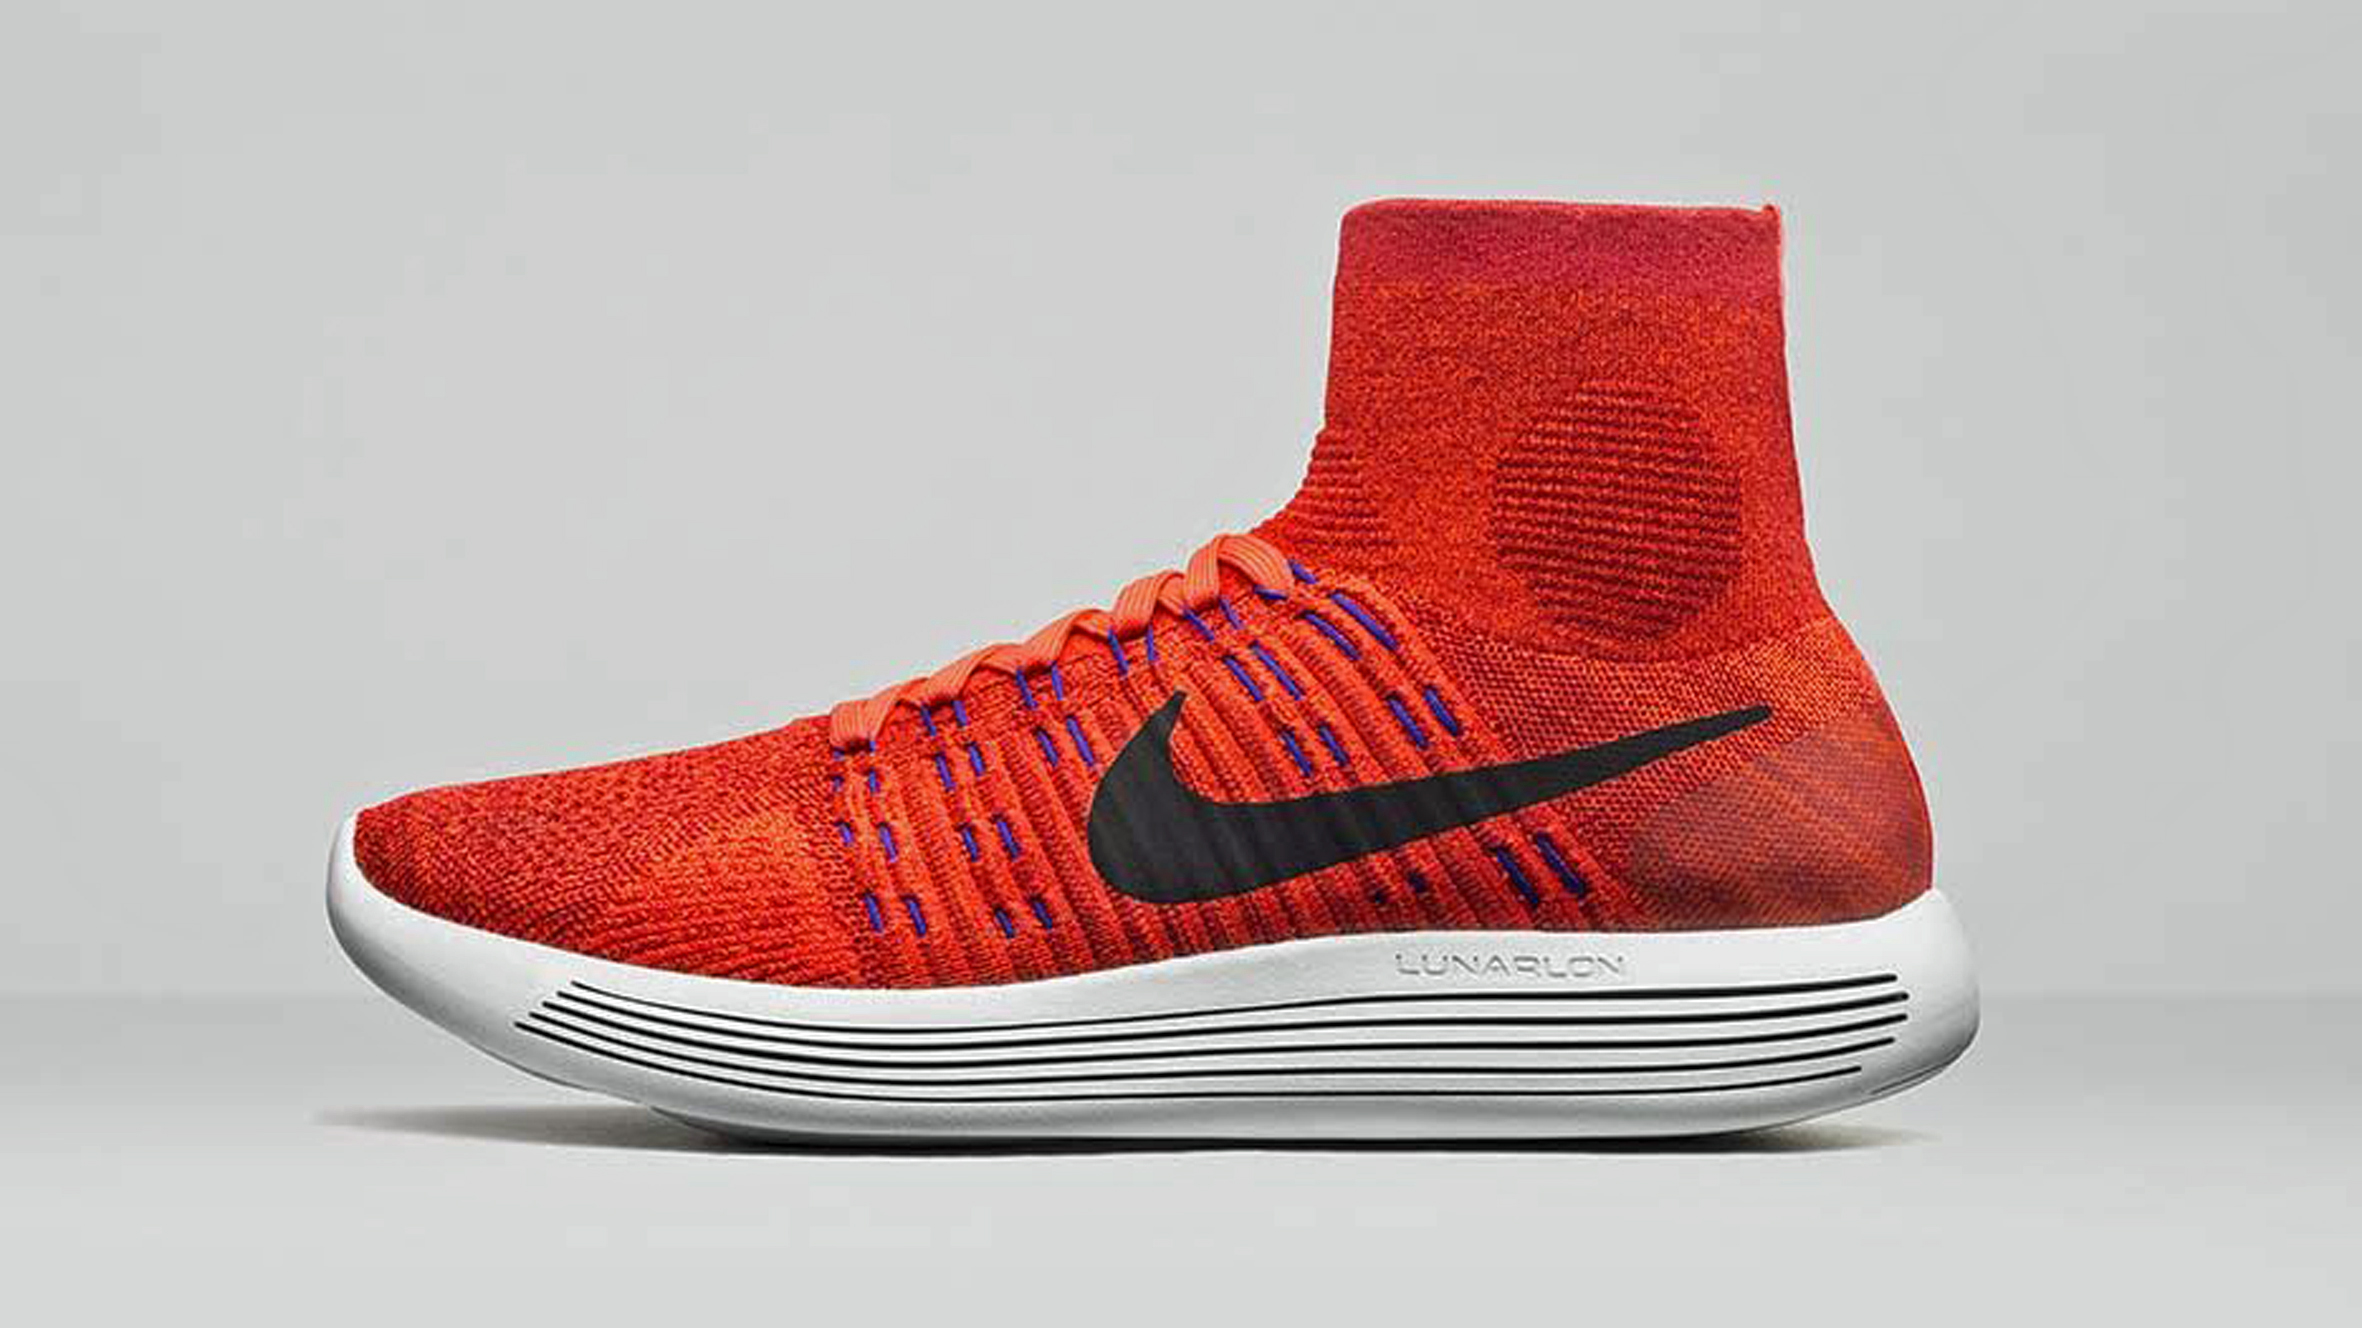 Hands on with Nike's LunarEpic Flyknit 